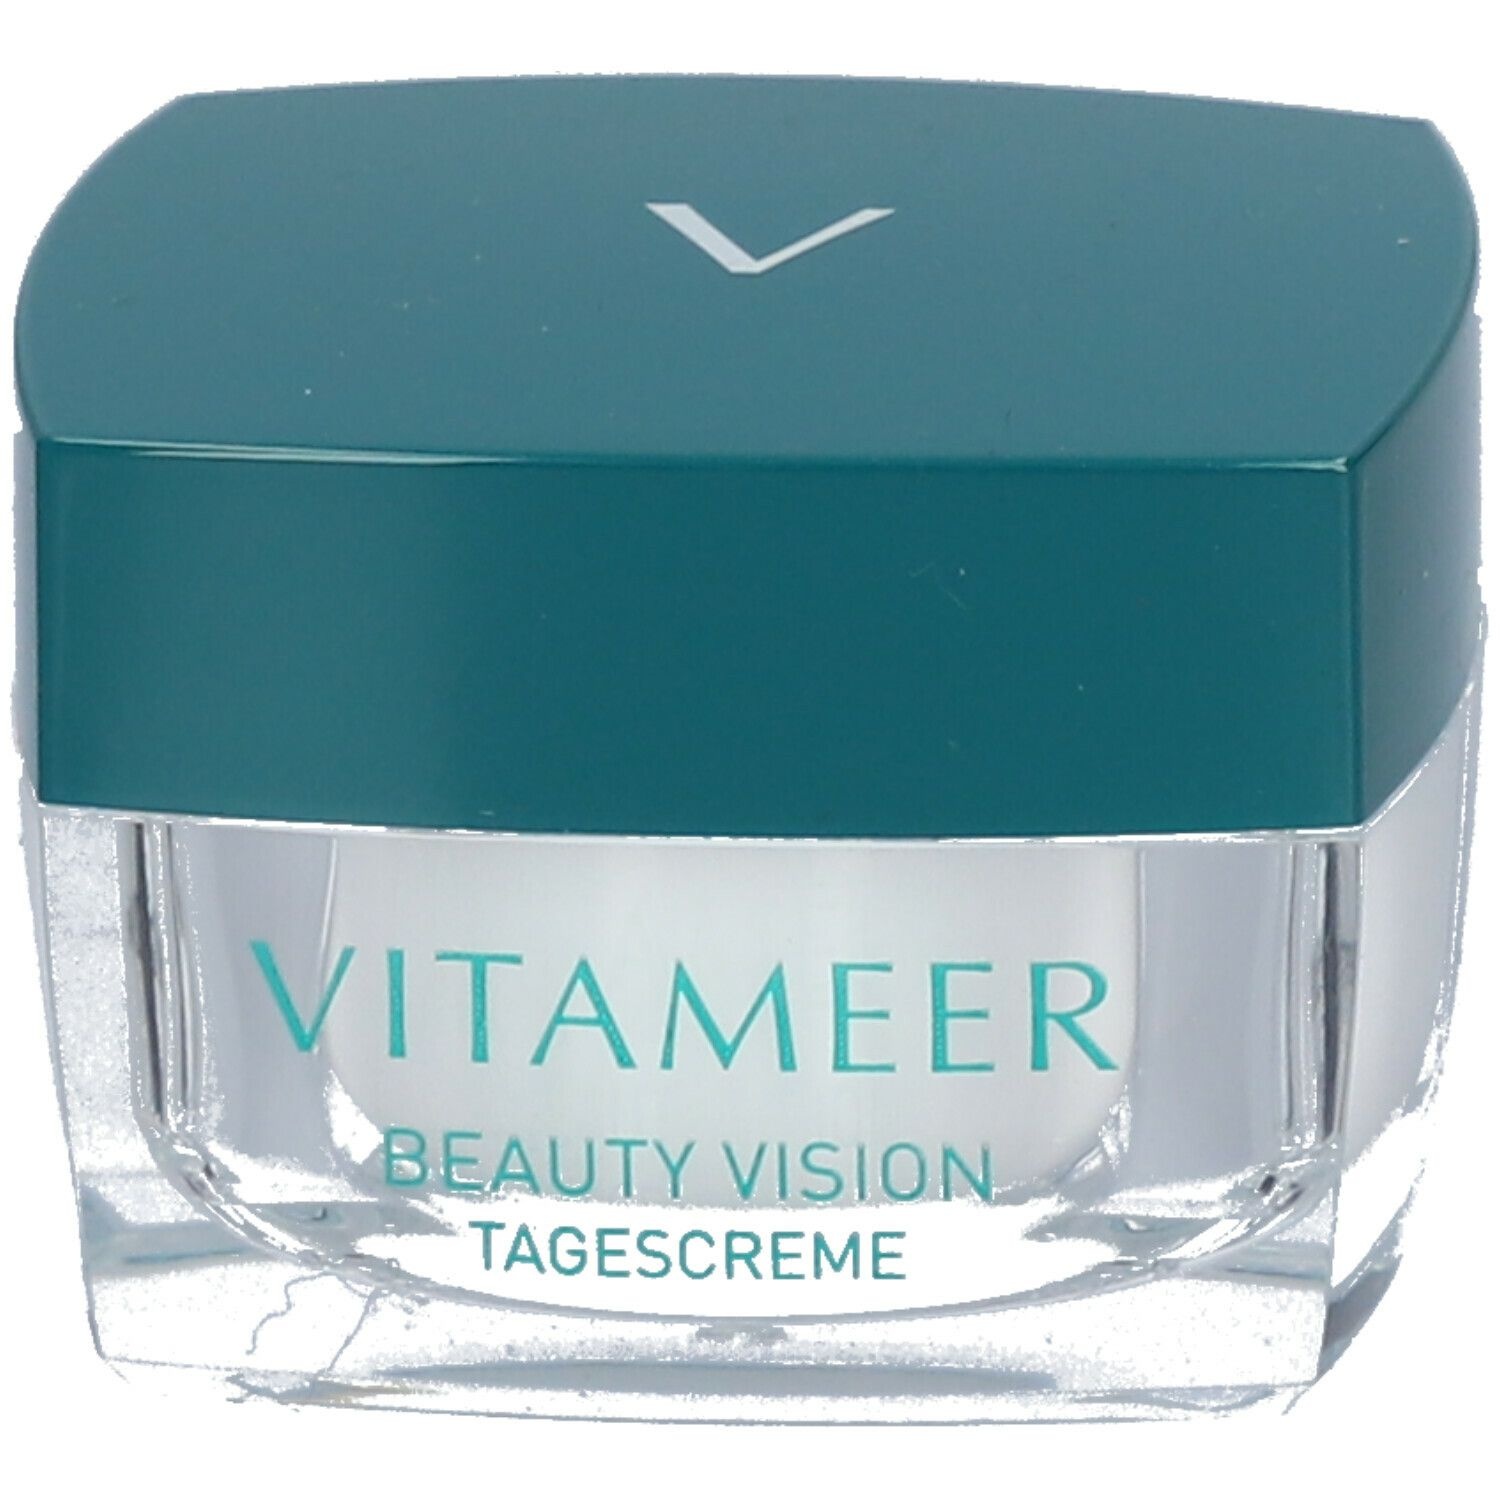 Vitameer Beauty Vision Tagescreme